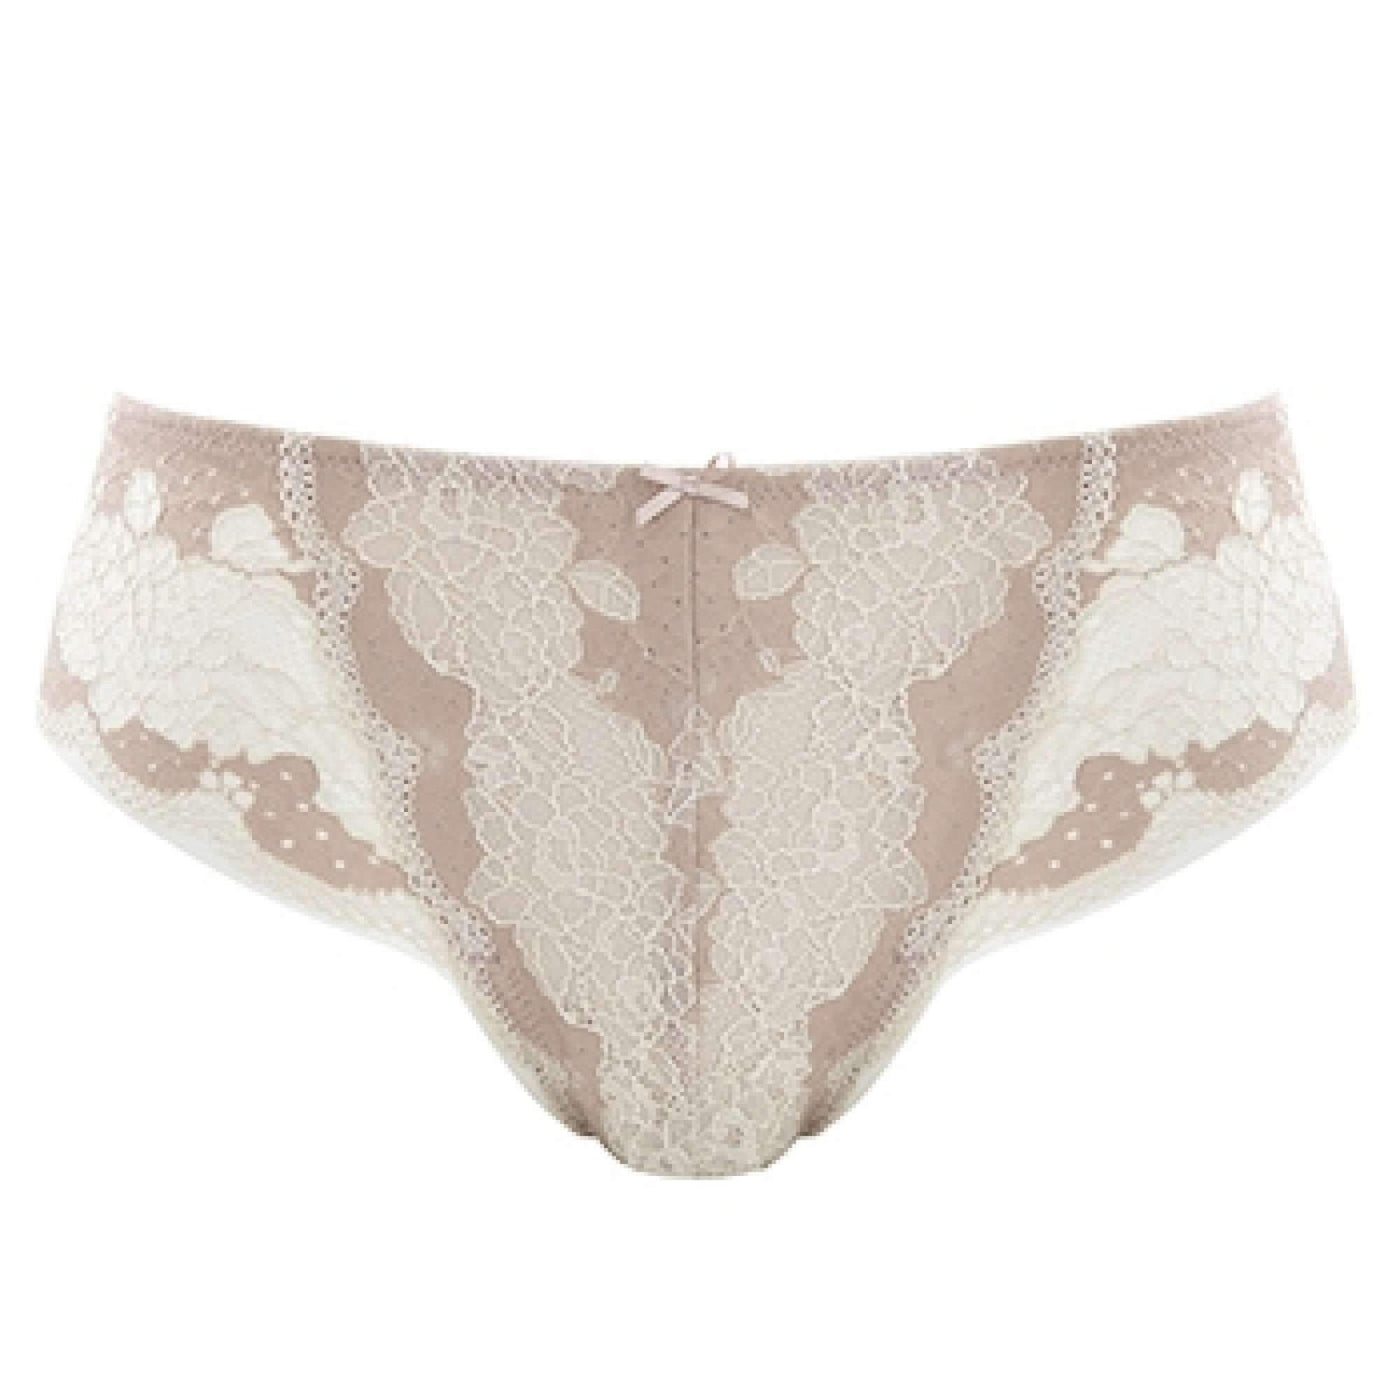 Panache Clara Brief 7253-Panties-Panache-Cameo/Ivory-Small-Anna Bella Fine Lingerie, Reveal Your Most Gorgeous Self!